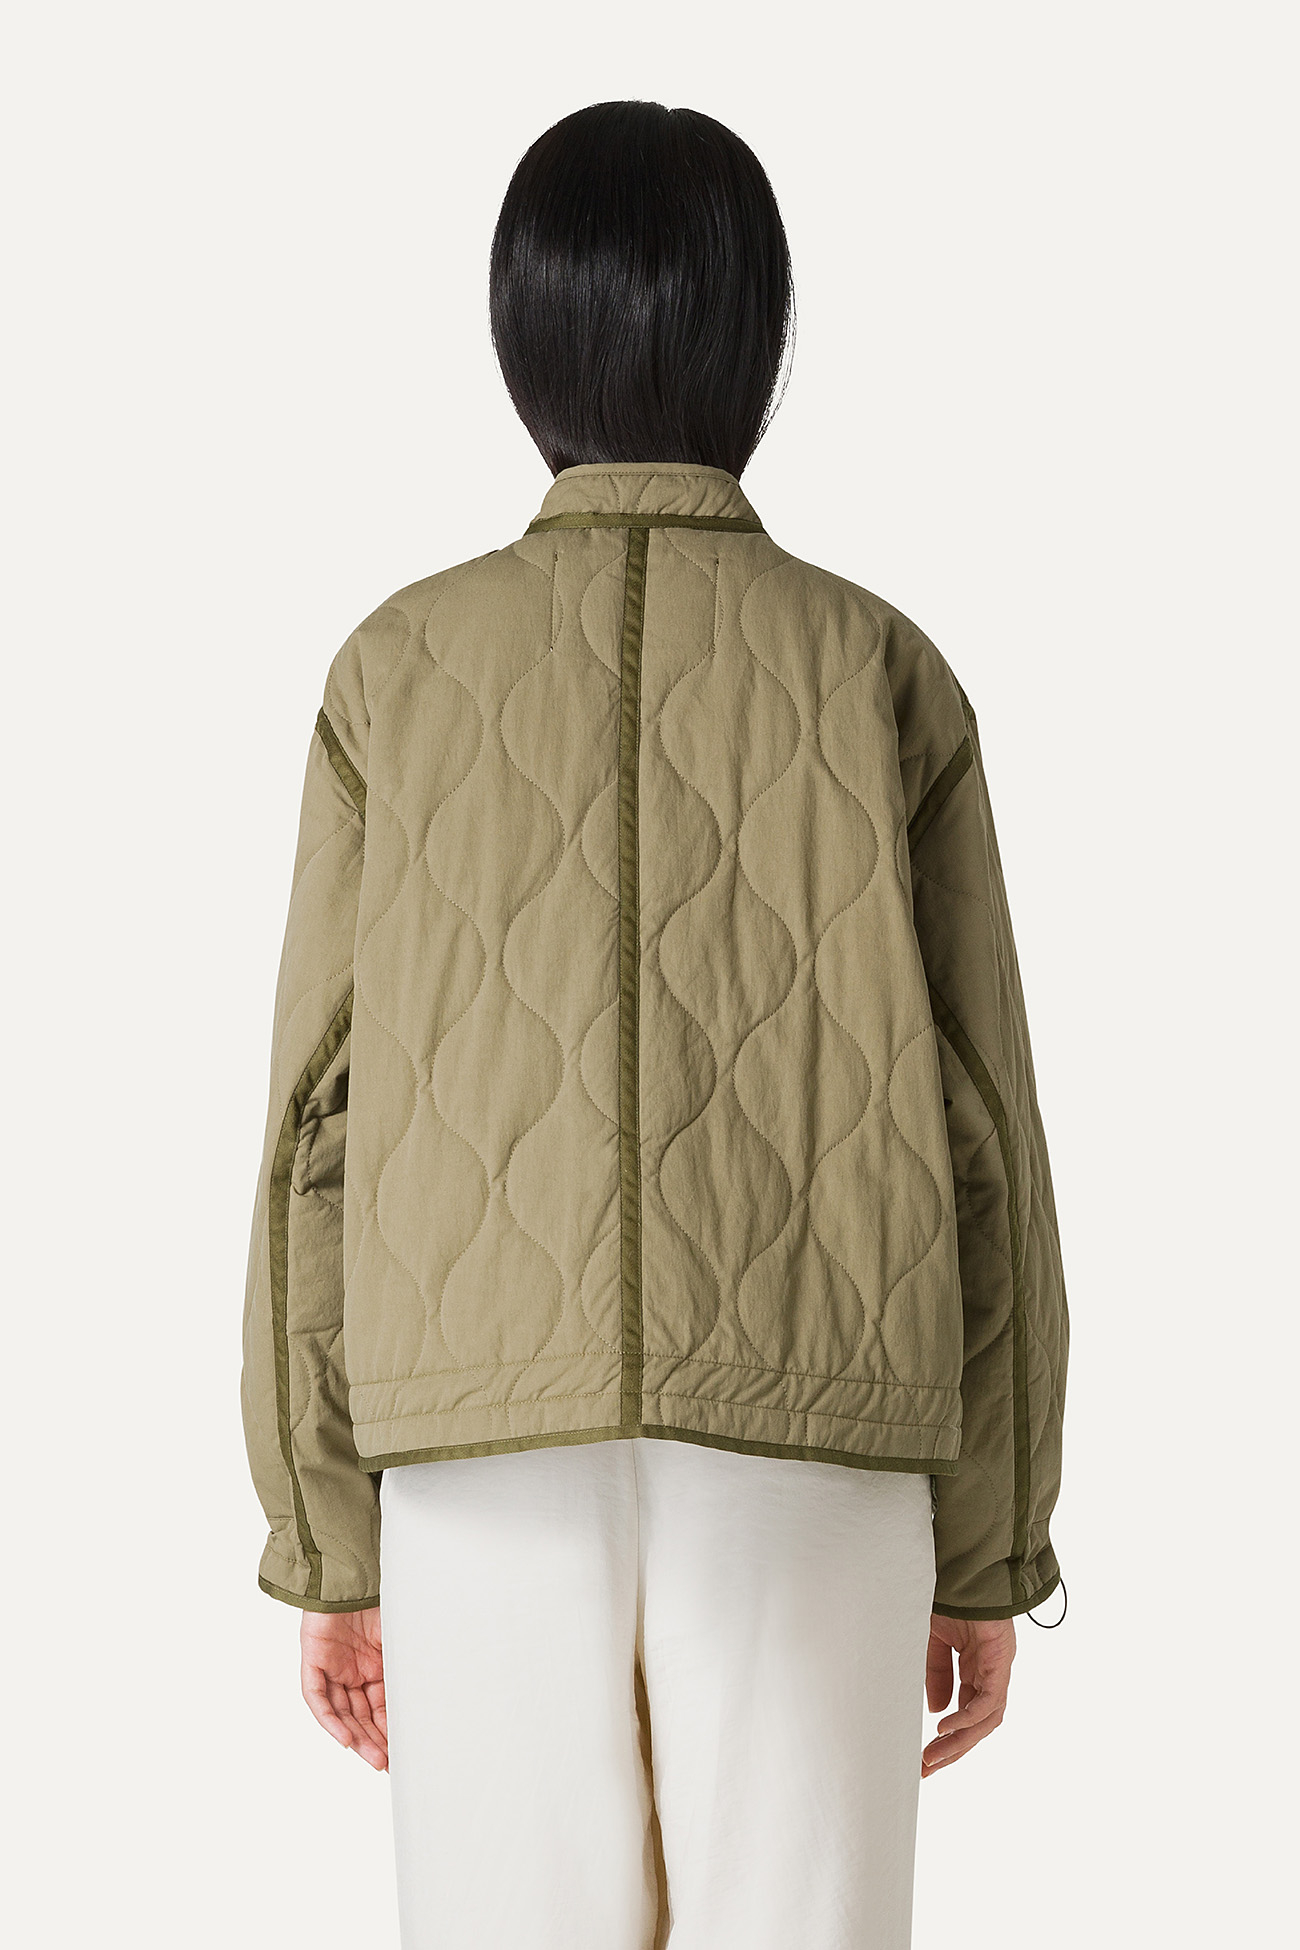 FLARED SHORT JACKET IN QUILTED NYLON 9224 - MOSS GREEN - OOF WEAR